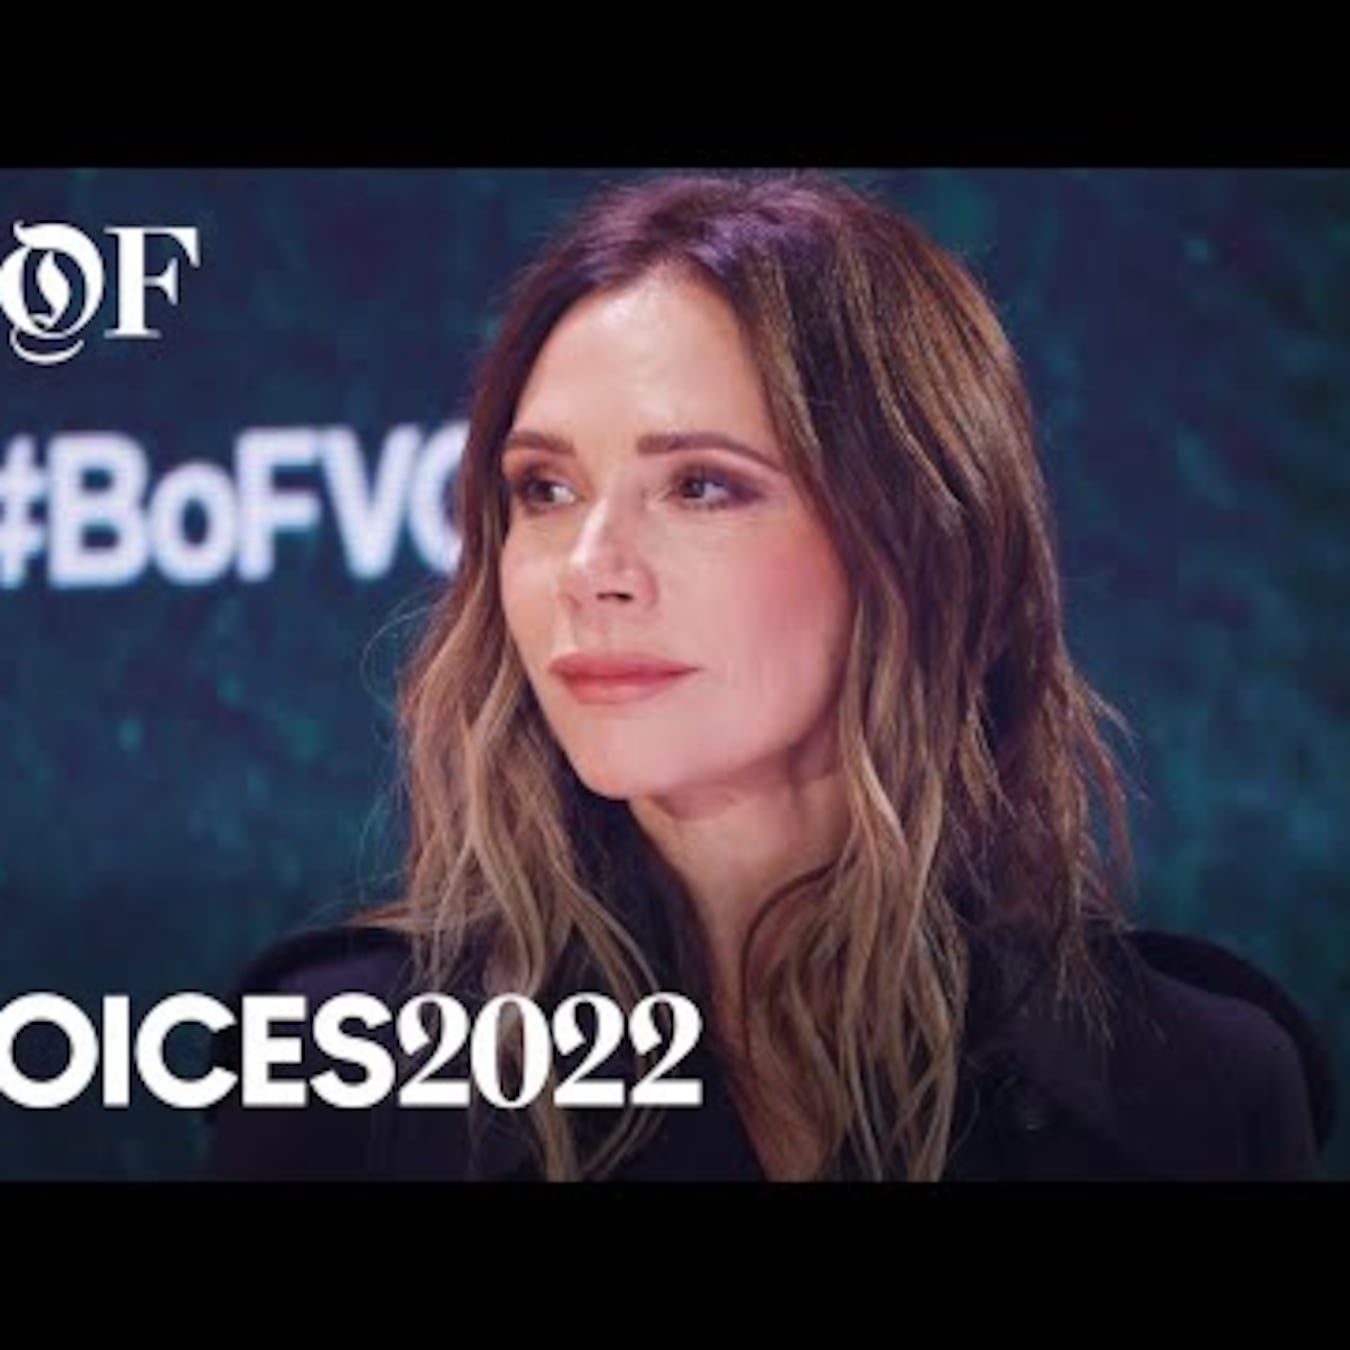 Project-BoF VOICES 2022